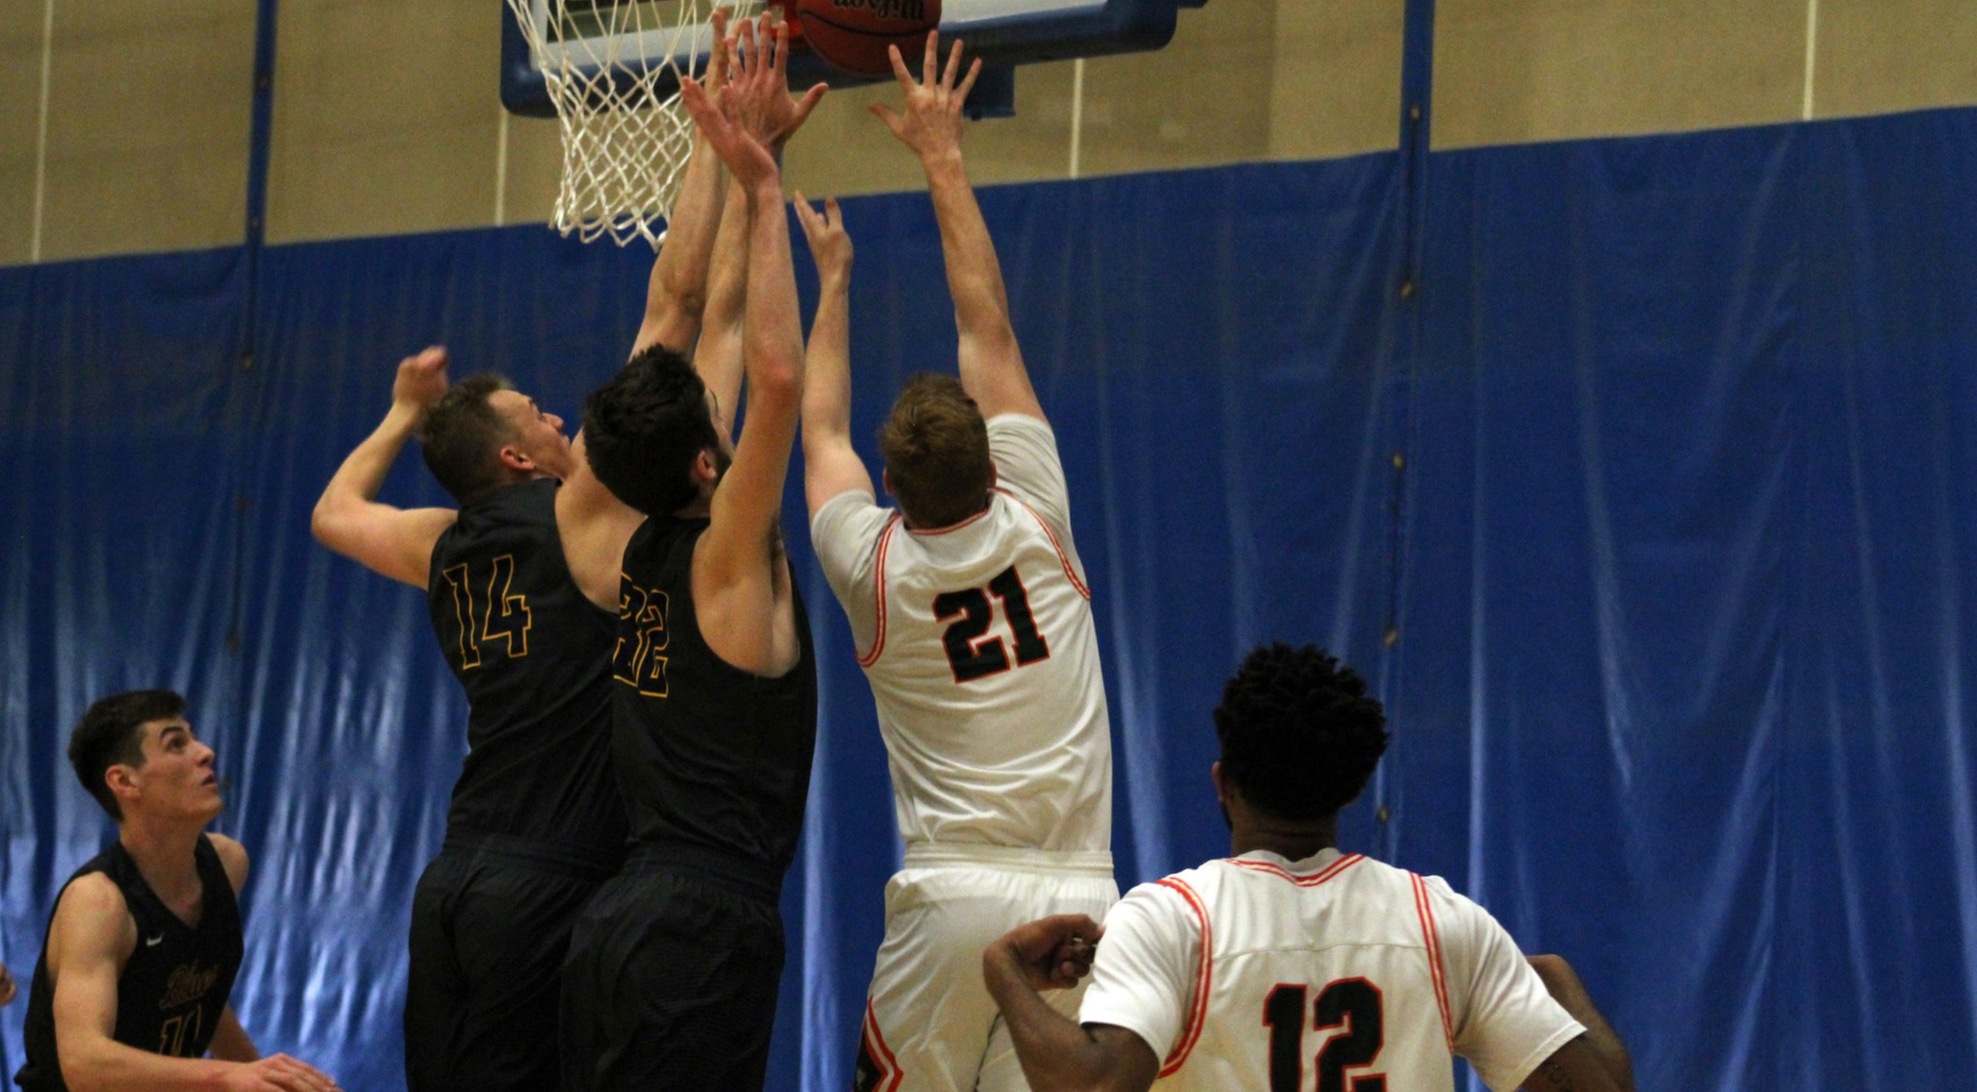 Gustafson, McHenry finish in double figures at CMS